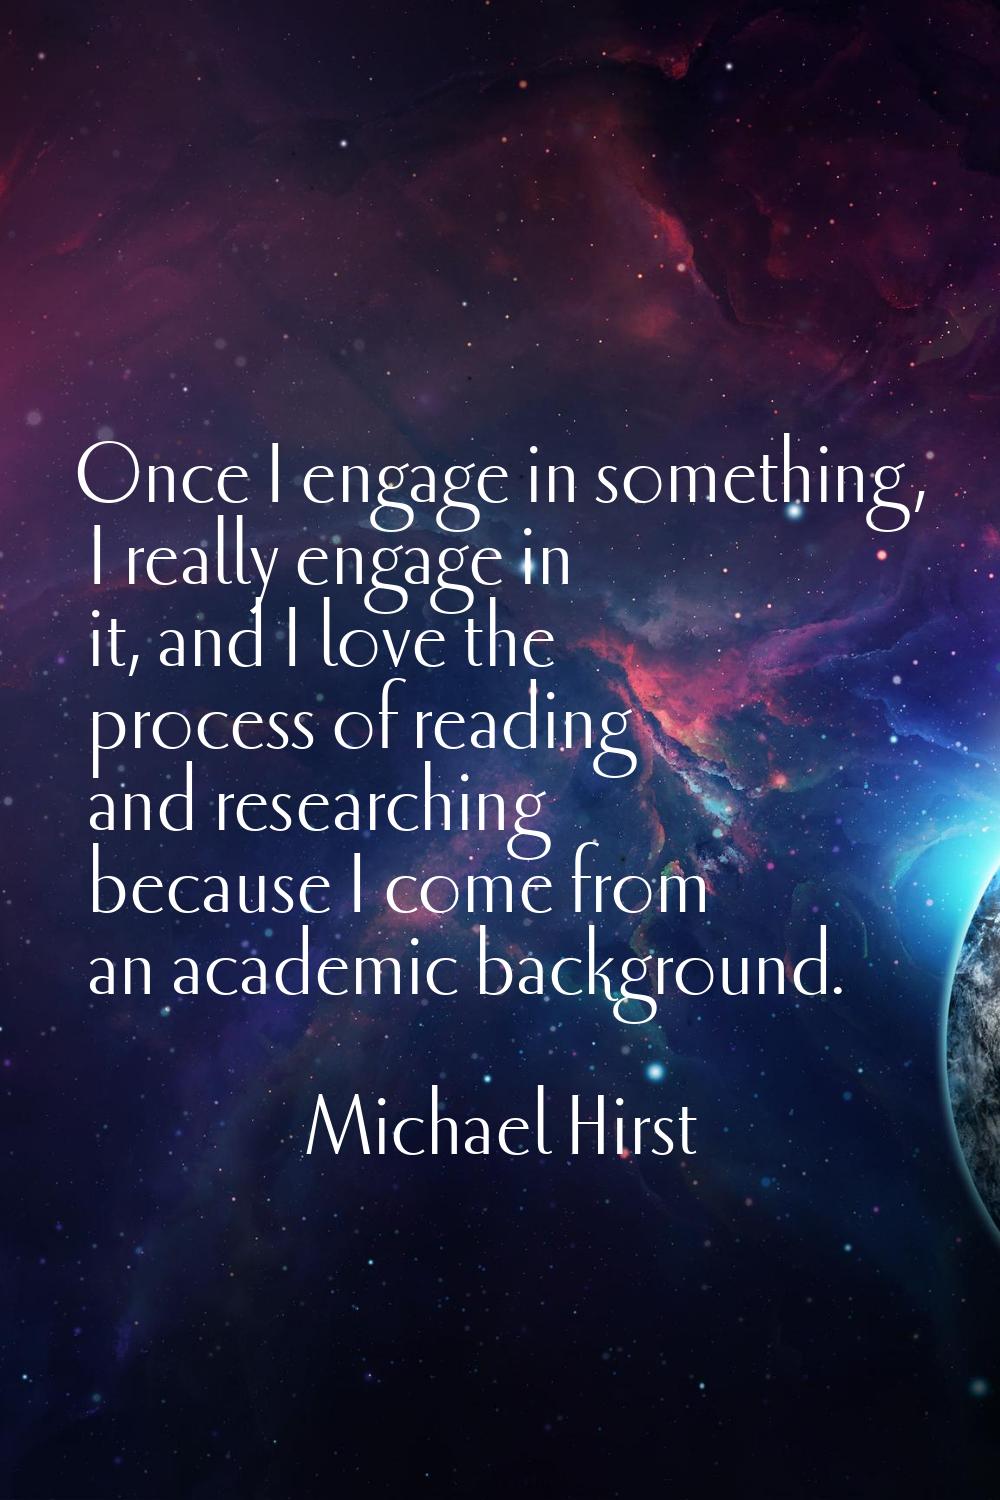 Once I engage in something, I really engage in it, and I love the process of reading and researchin